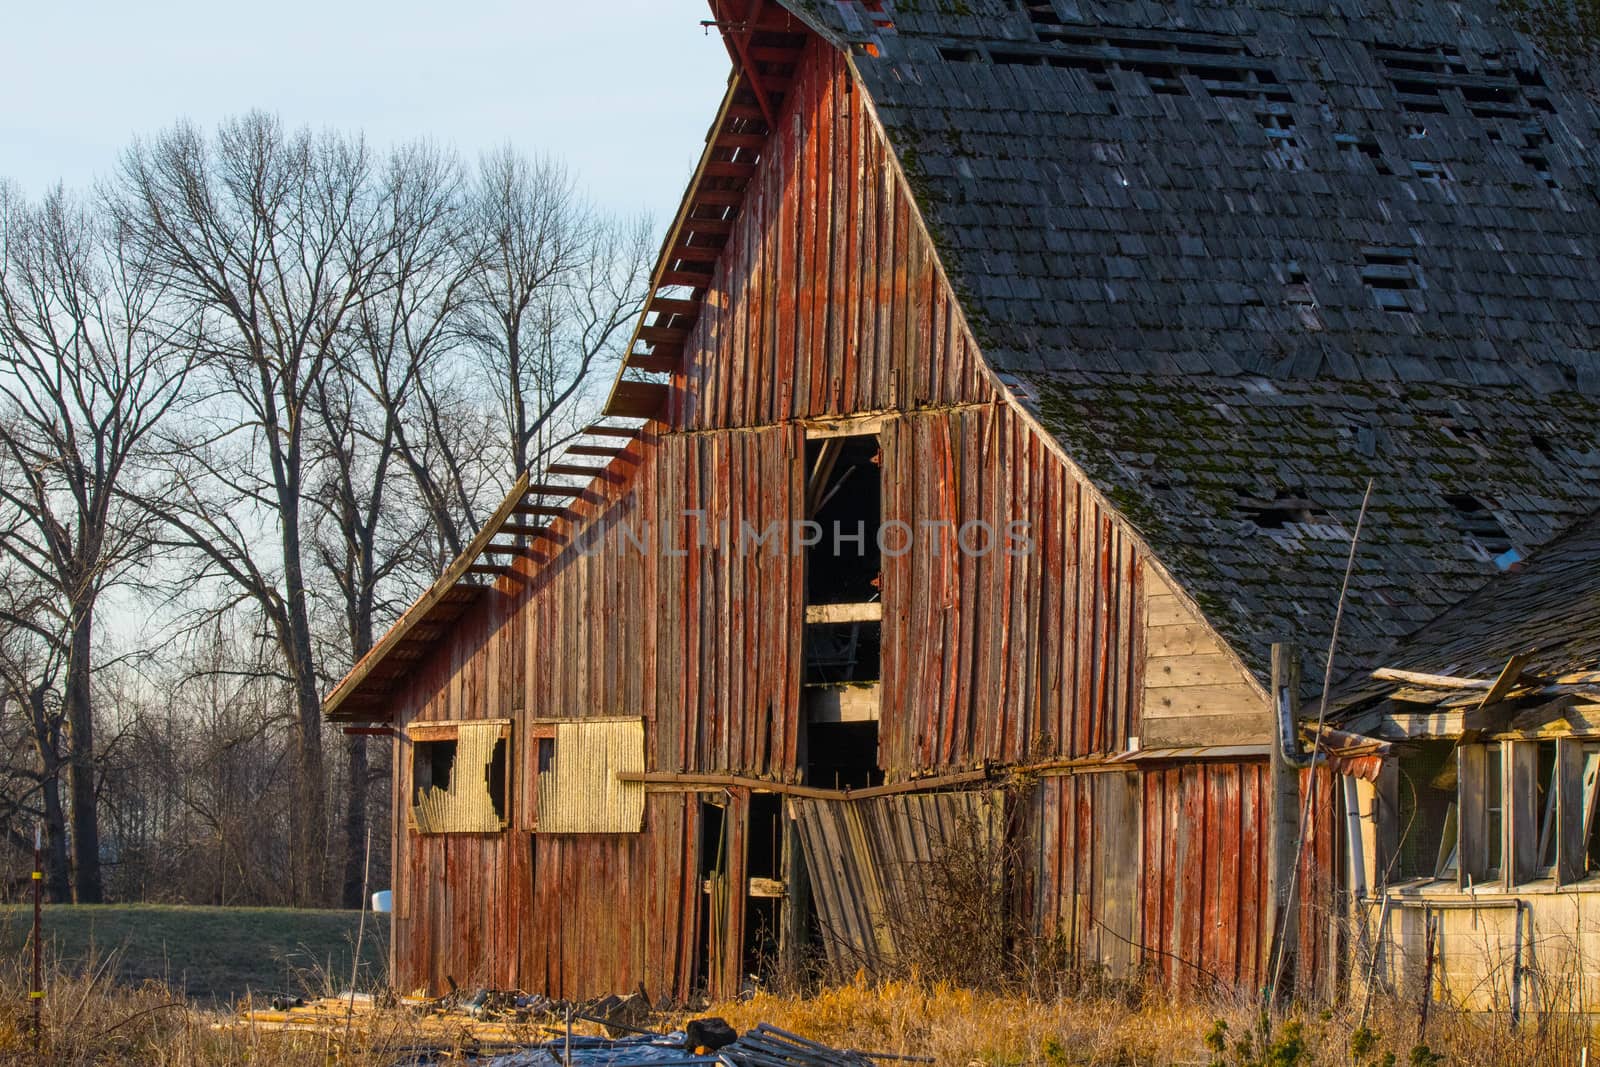 Weathered barn in Washington's Skagit Valley in early winter.